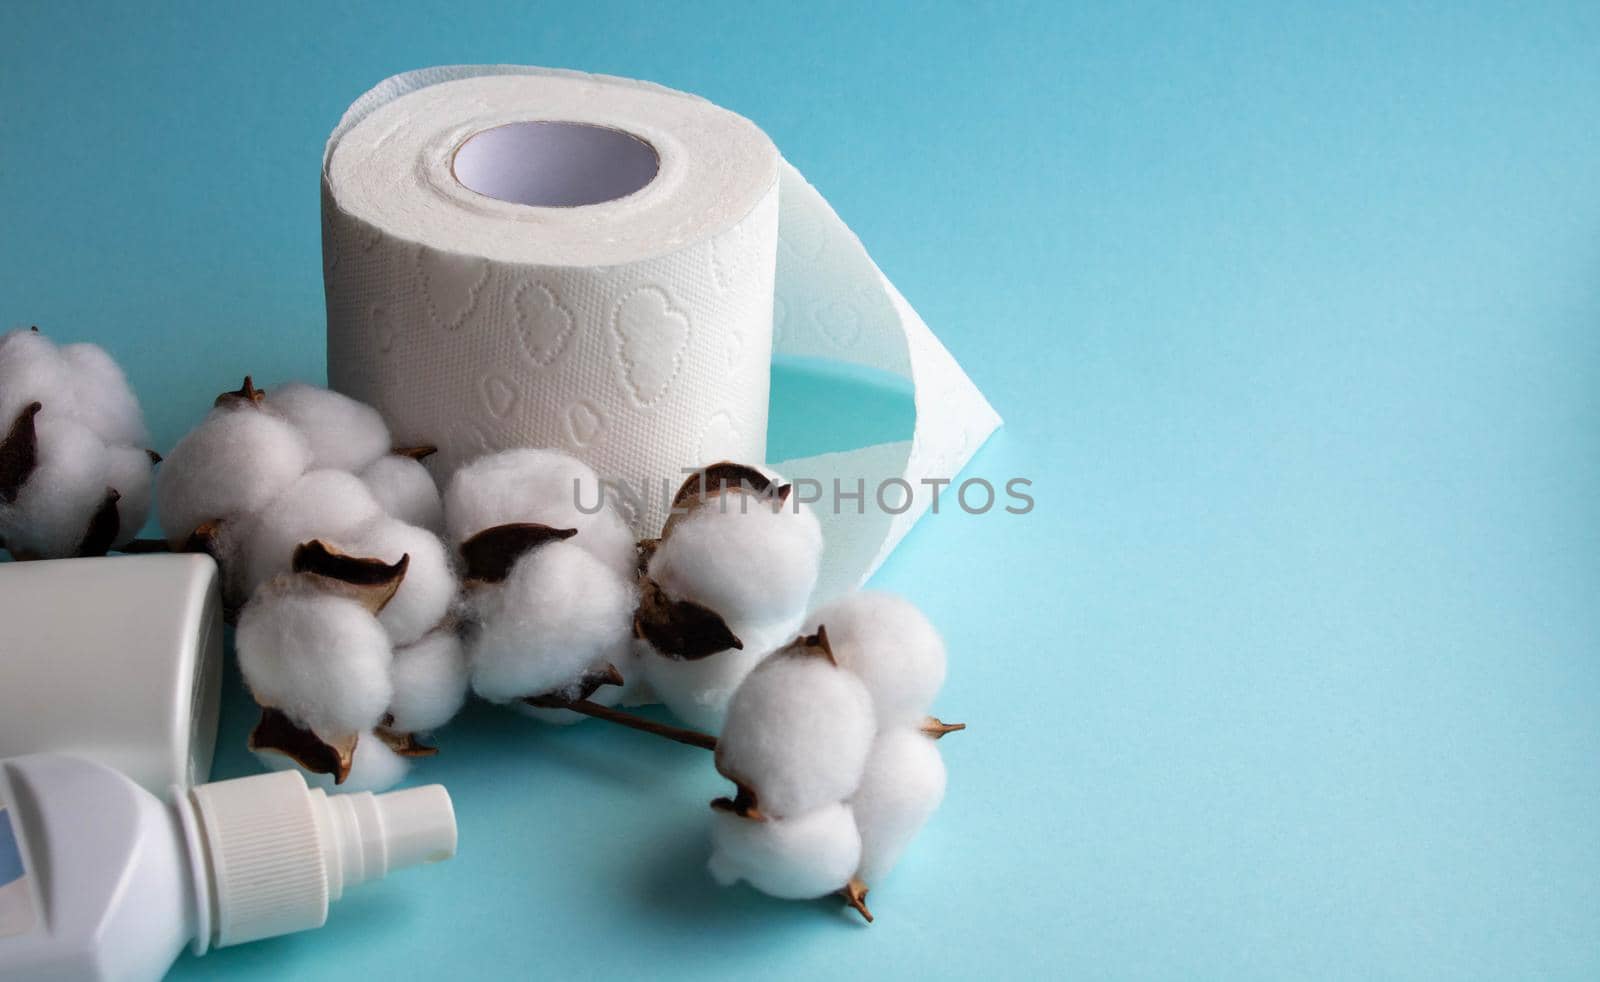 Toilet paper roll isolated on a blue background, with a branch of fluffy cotton flowers.